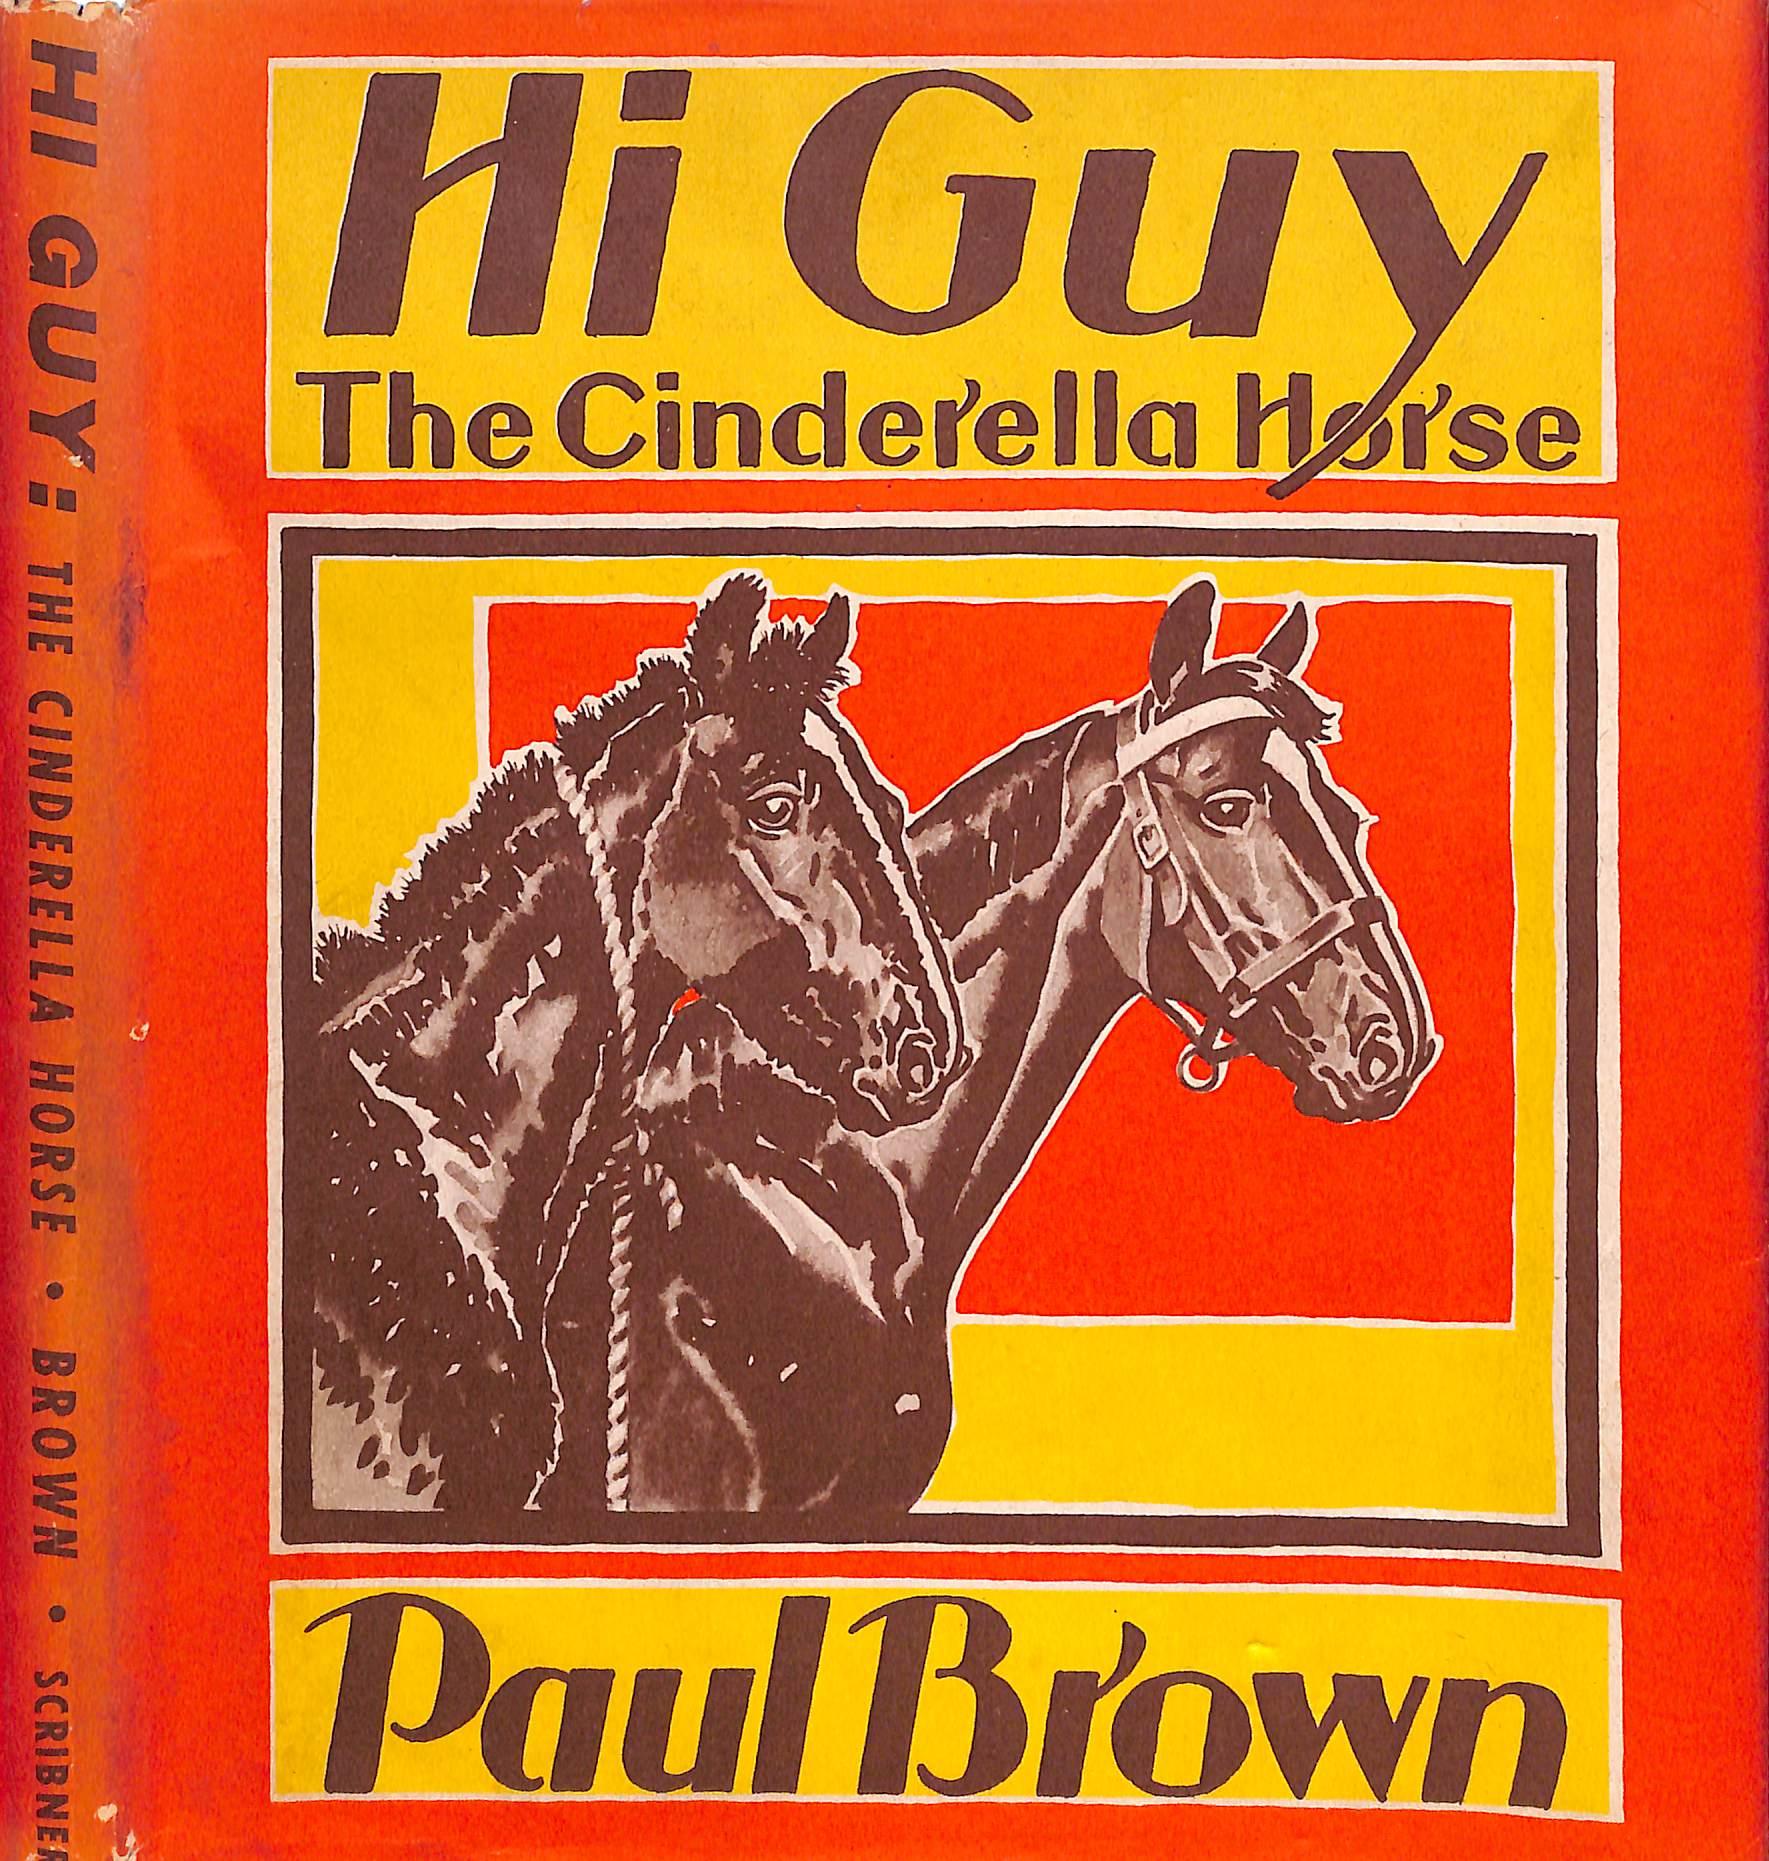 Original 1944 Pencil Drawing From Hi, Guy! The Cinderella Horse By Paul Brown 38 For Sale 5